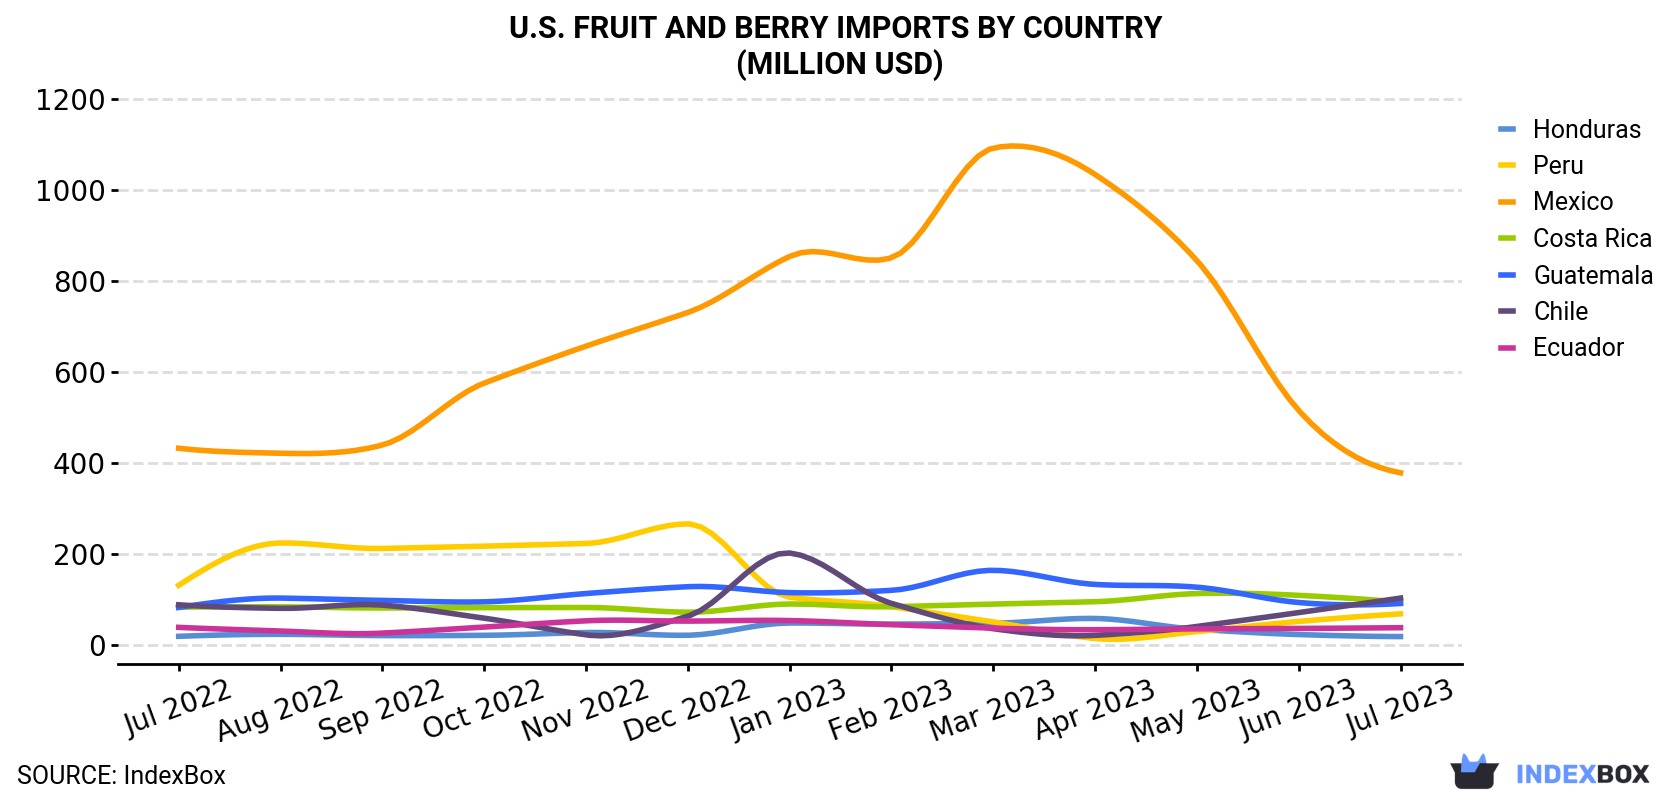 U.S. Fruit and Berry Imports By Country (Million USD)